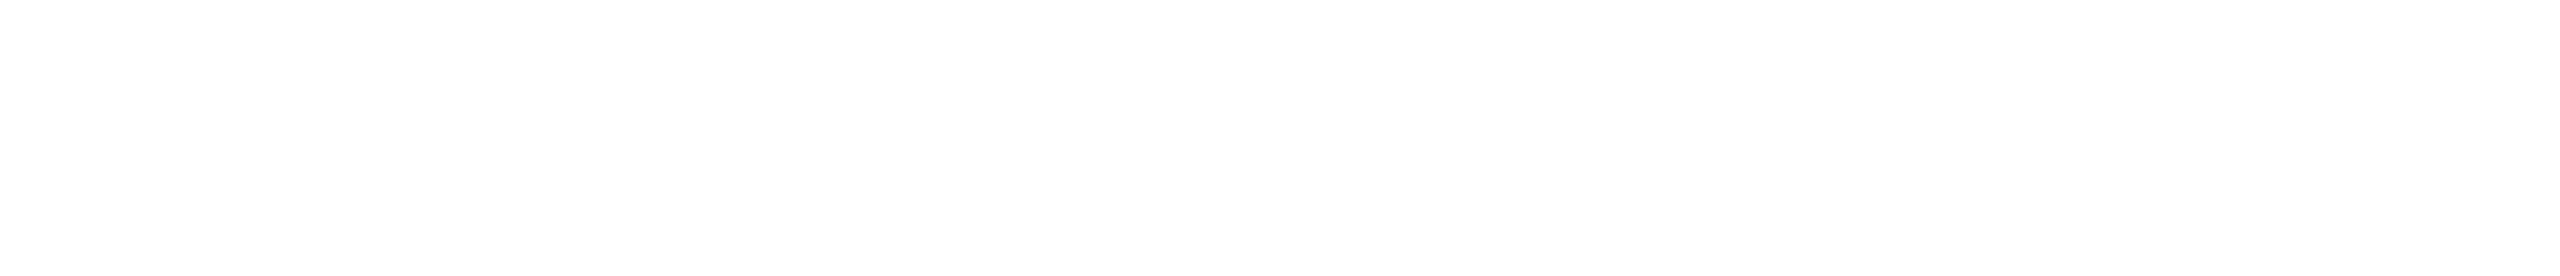 Places to stay